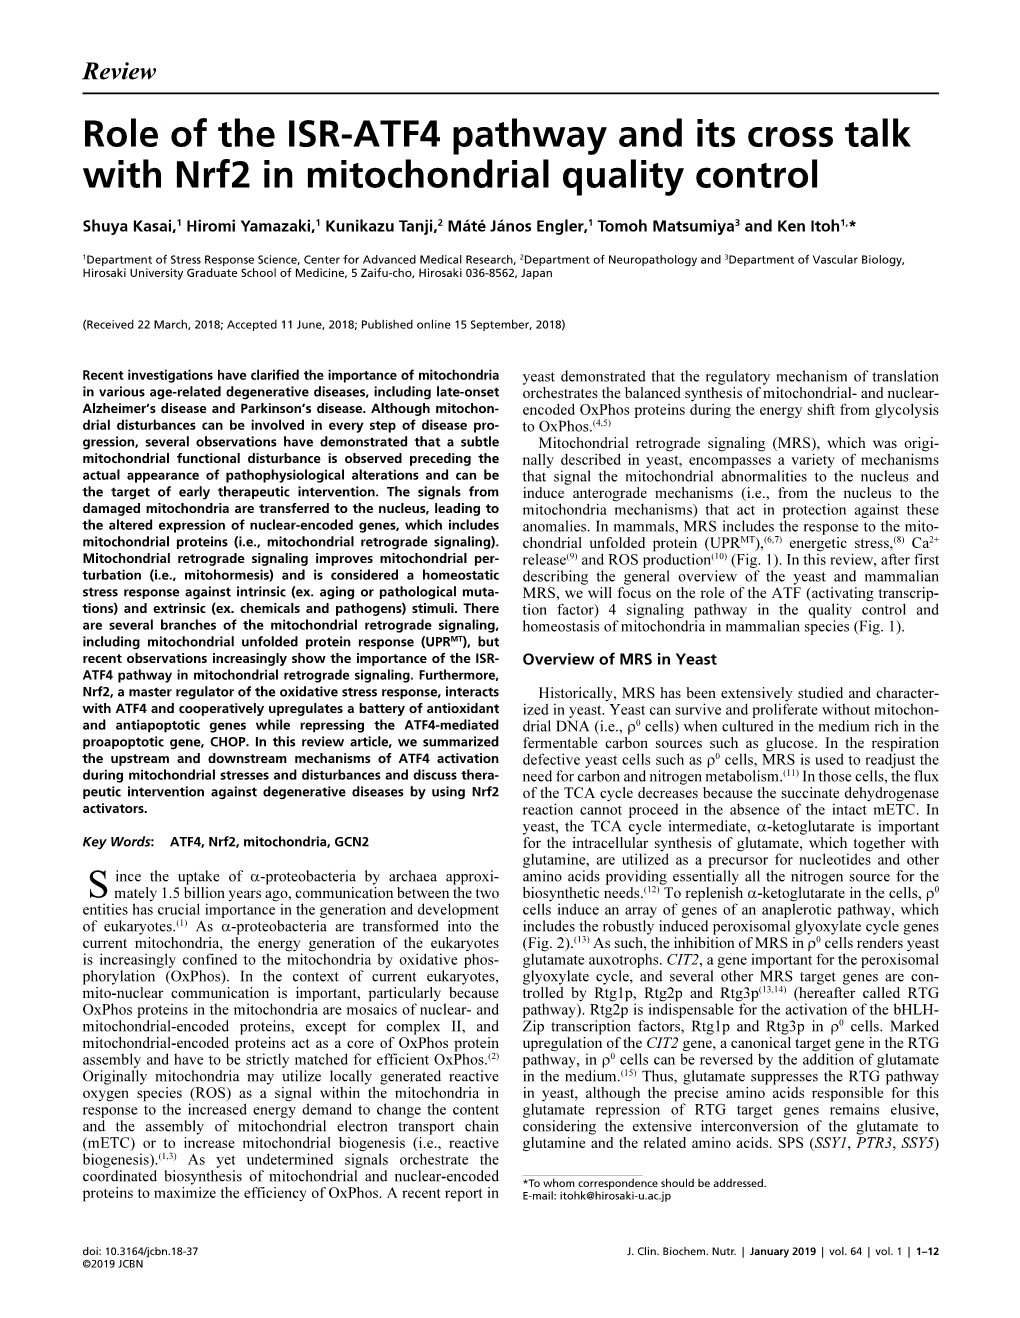 Role of the ISR ATF4 Pathway and Its Cross Talk with Nrf2 in Mitochondrial